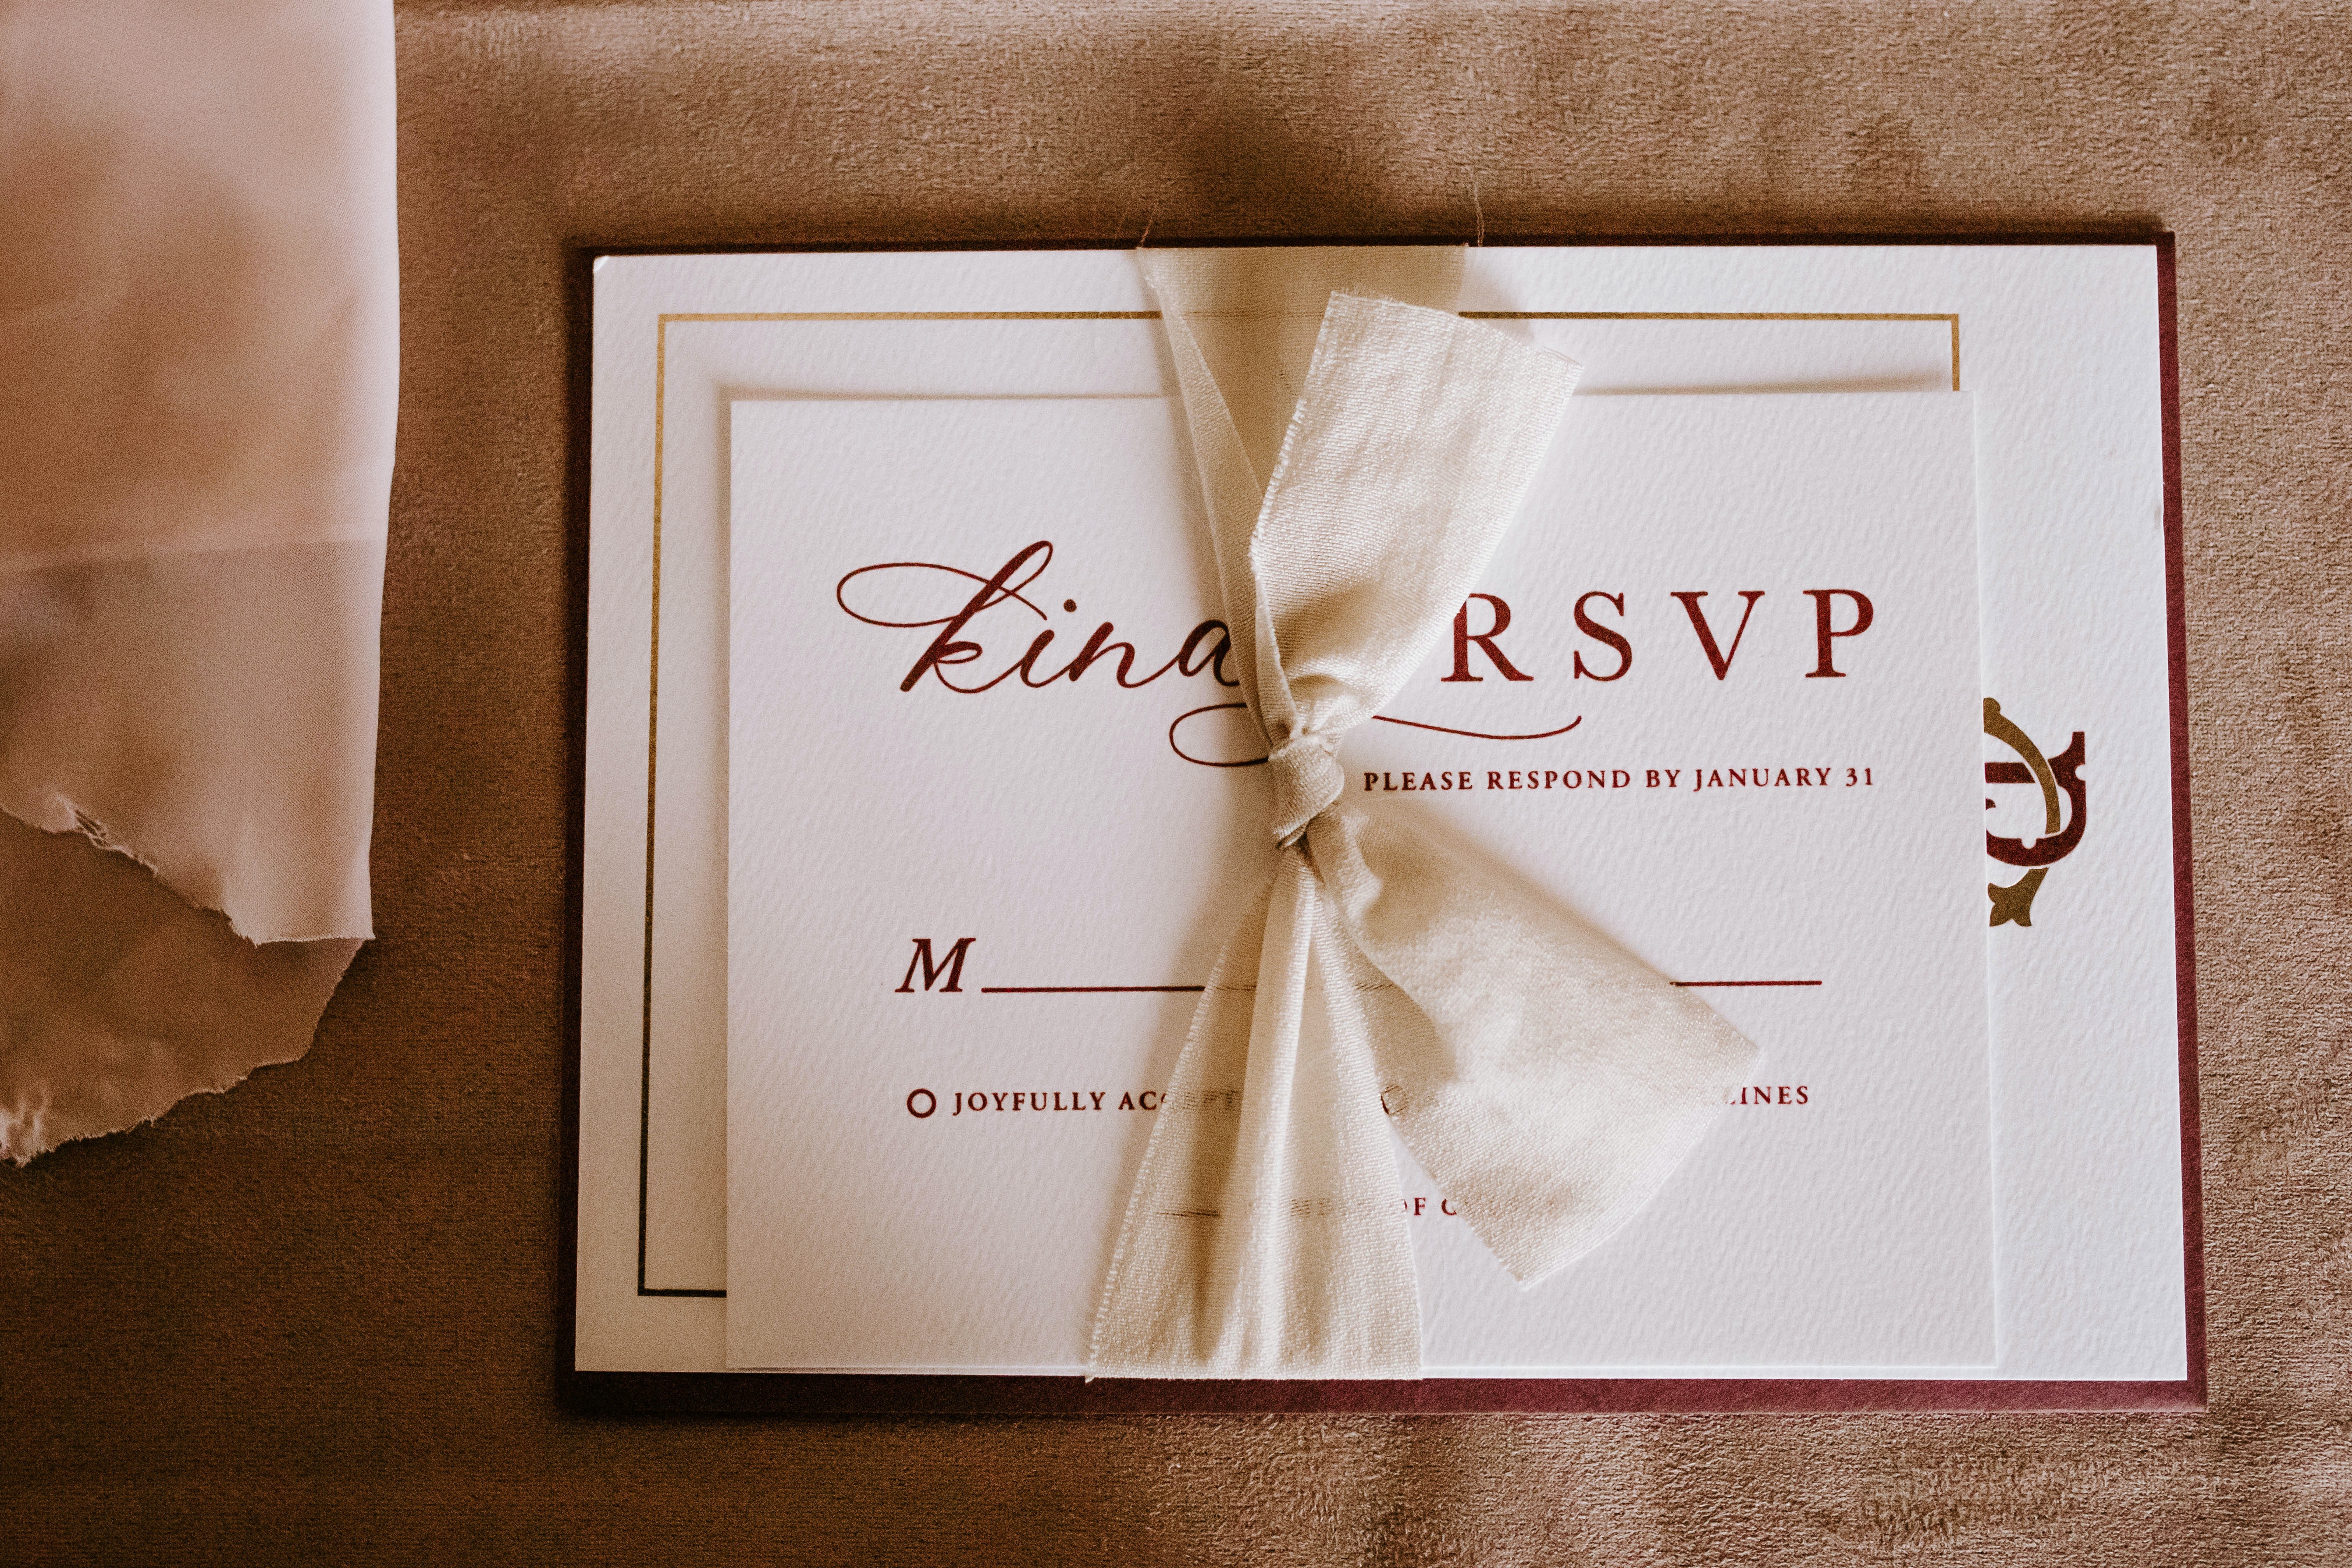 6 Secrets for Getting Event Guest RSVPs